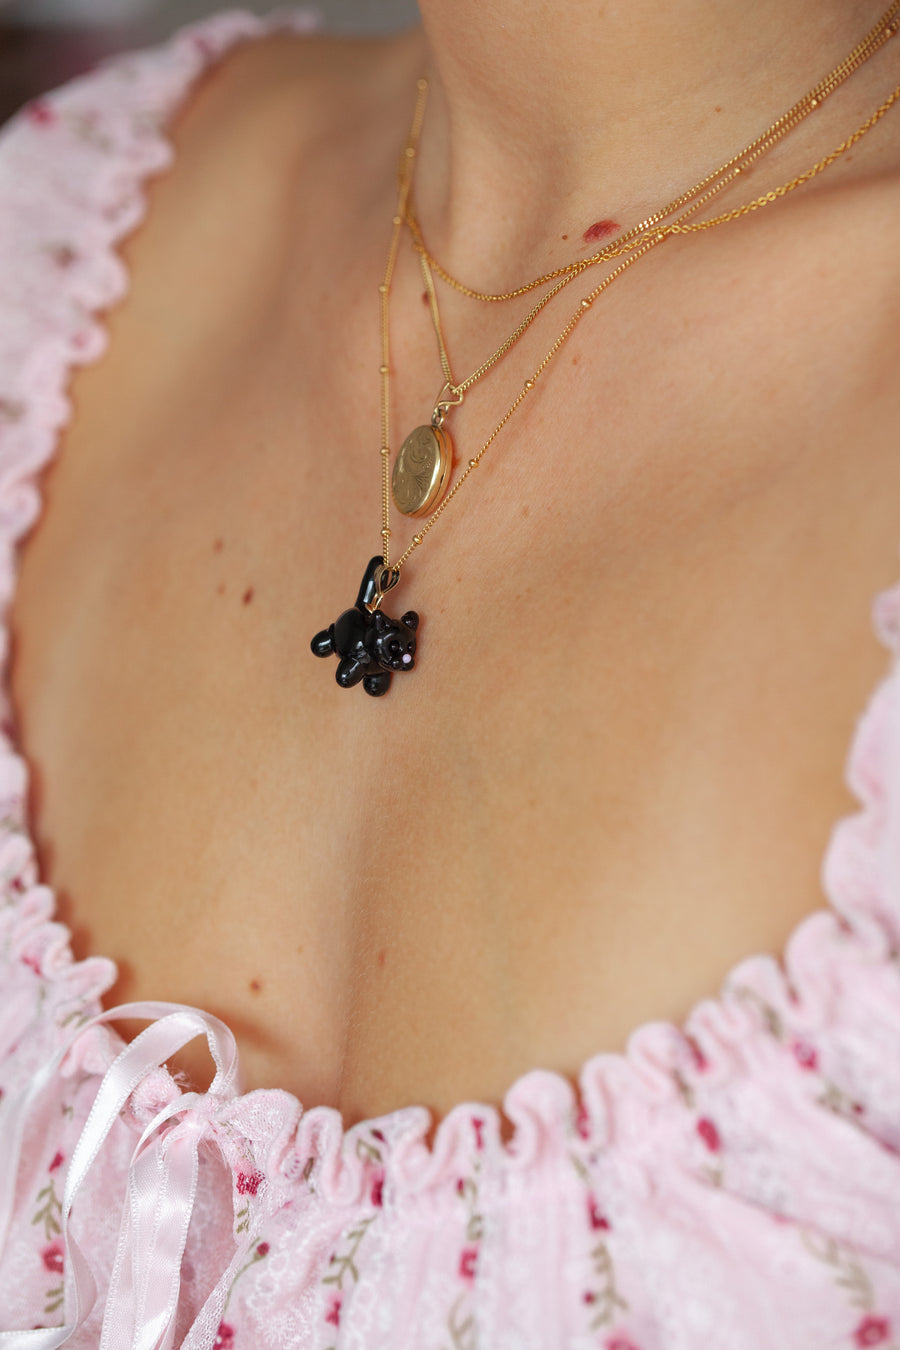 Kitty Cat Charm Necklace